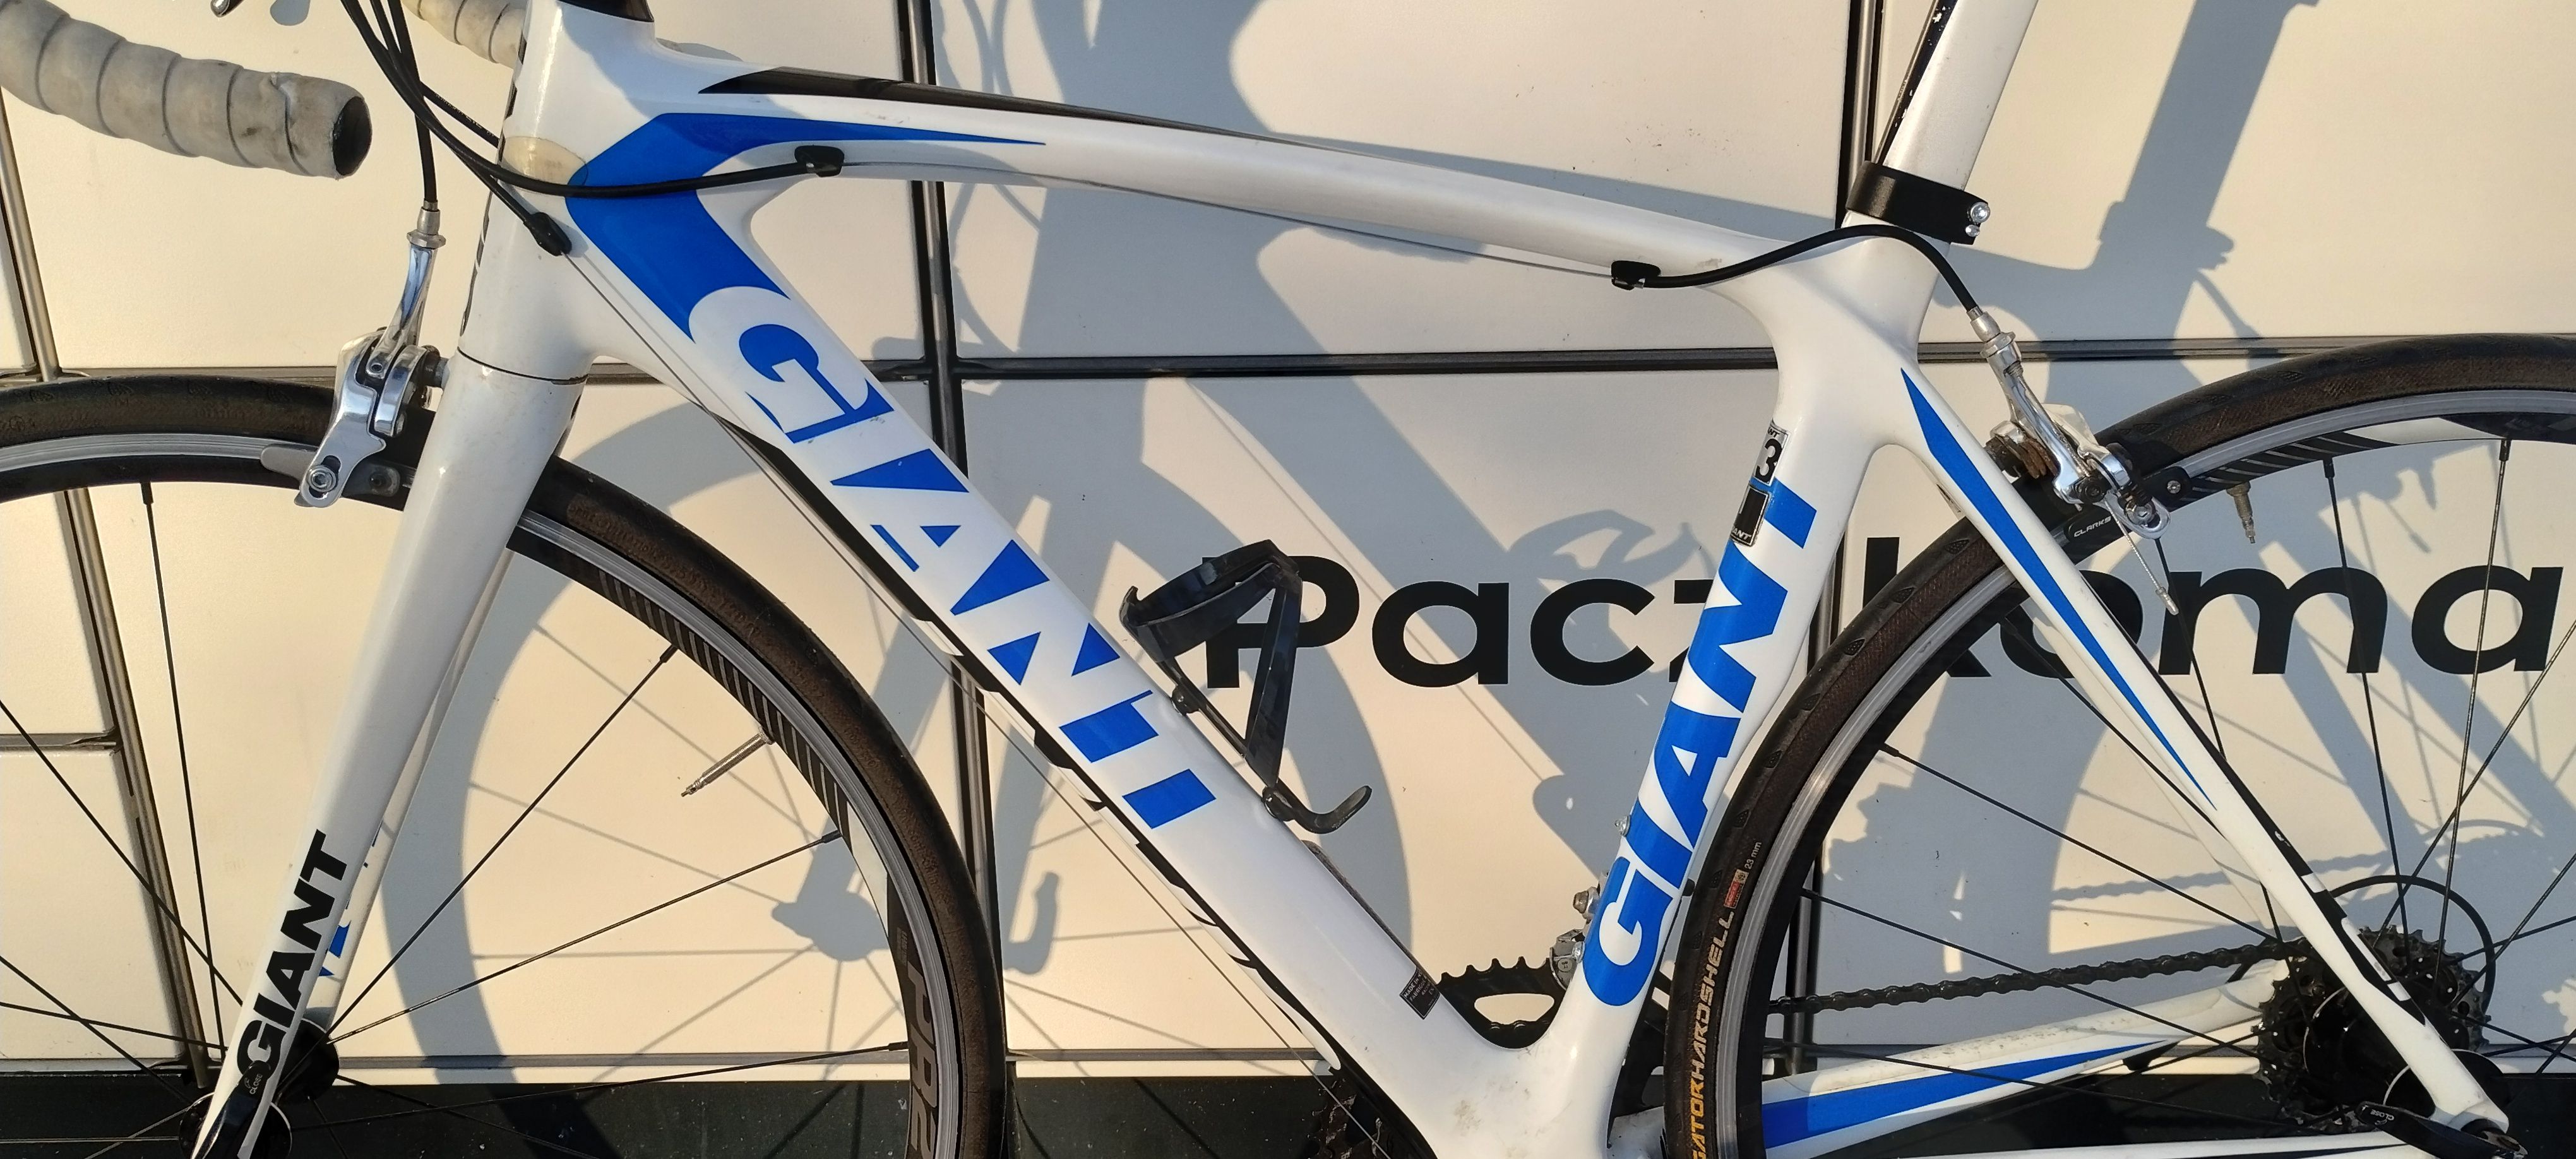 Giant TCR Composite 3